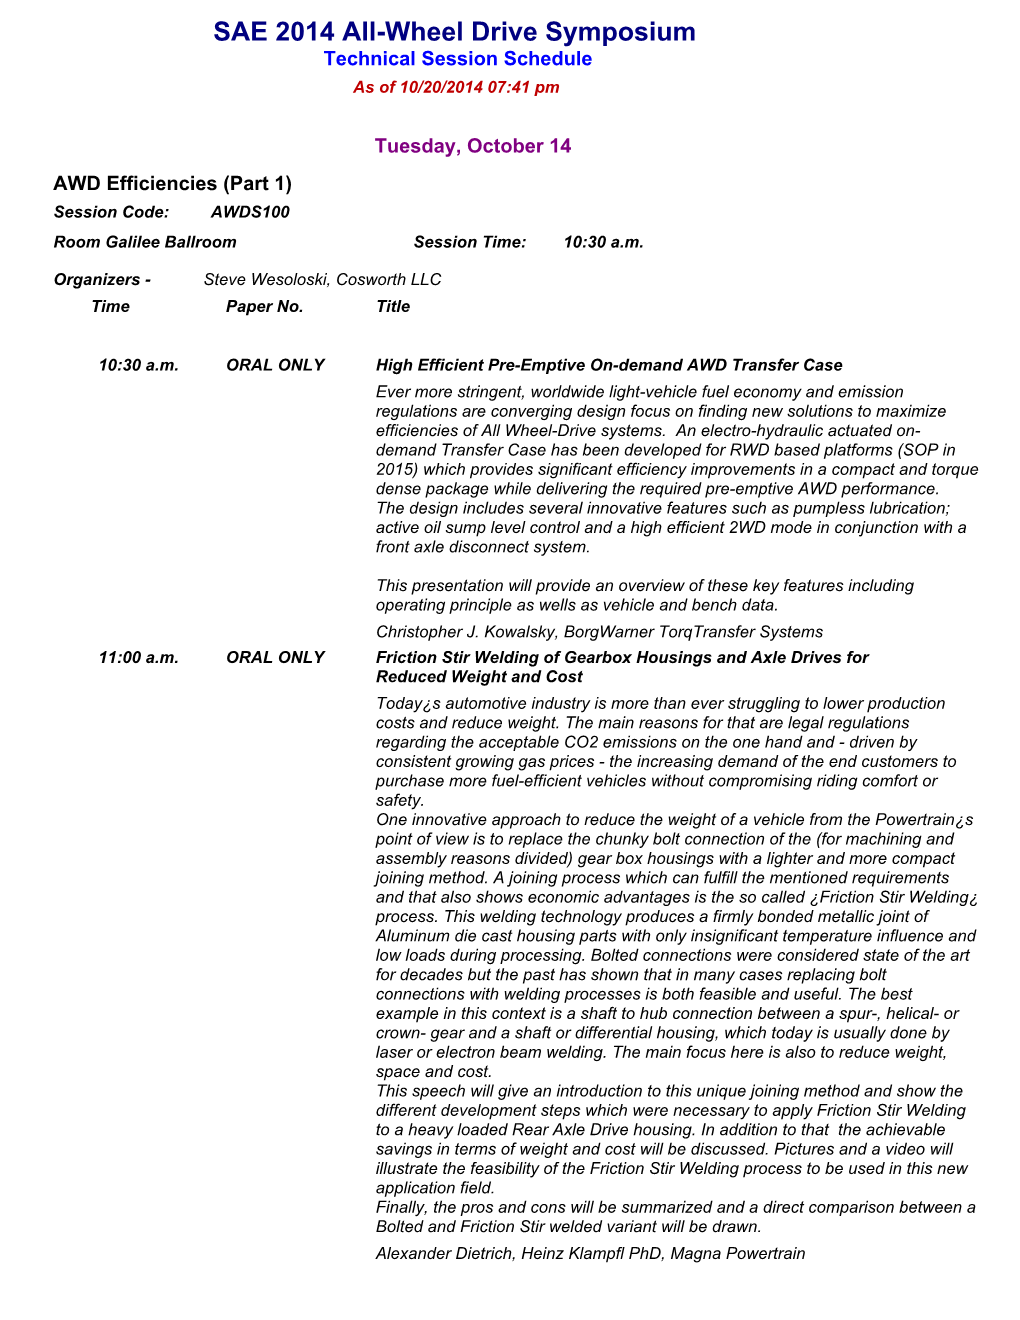 SAE 2014 All-Wheel Drive Symposium Technical Session Schedule As of 10/20/2014 07:41 Pm